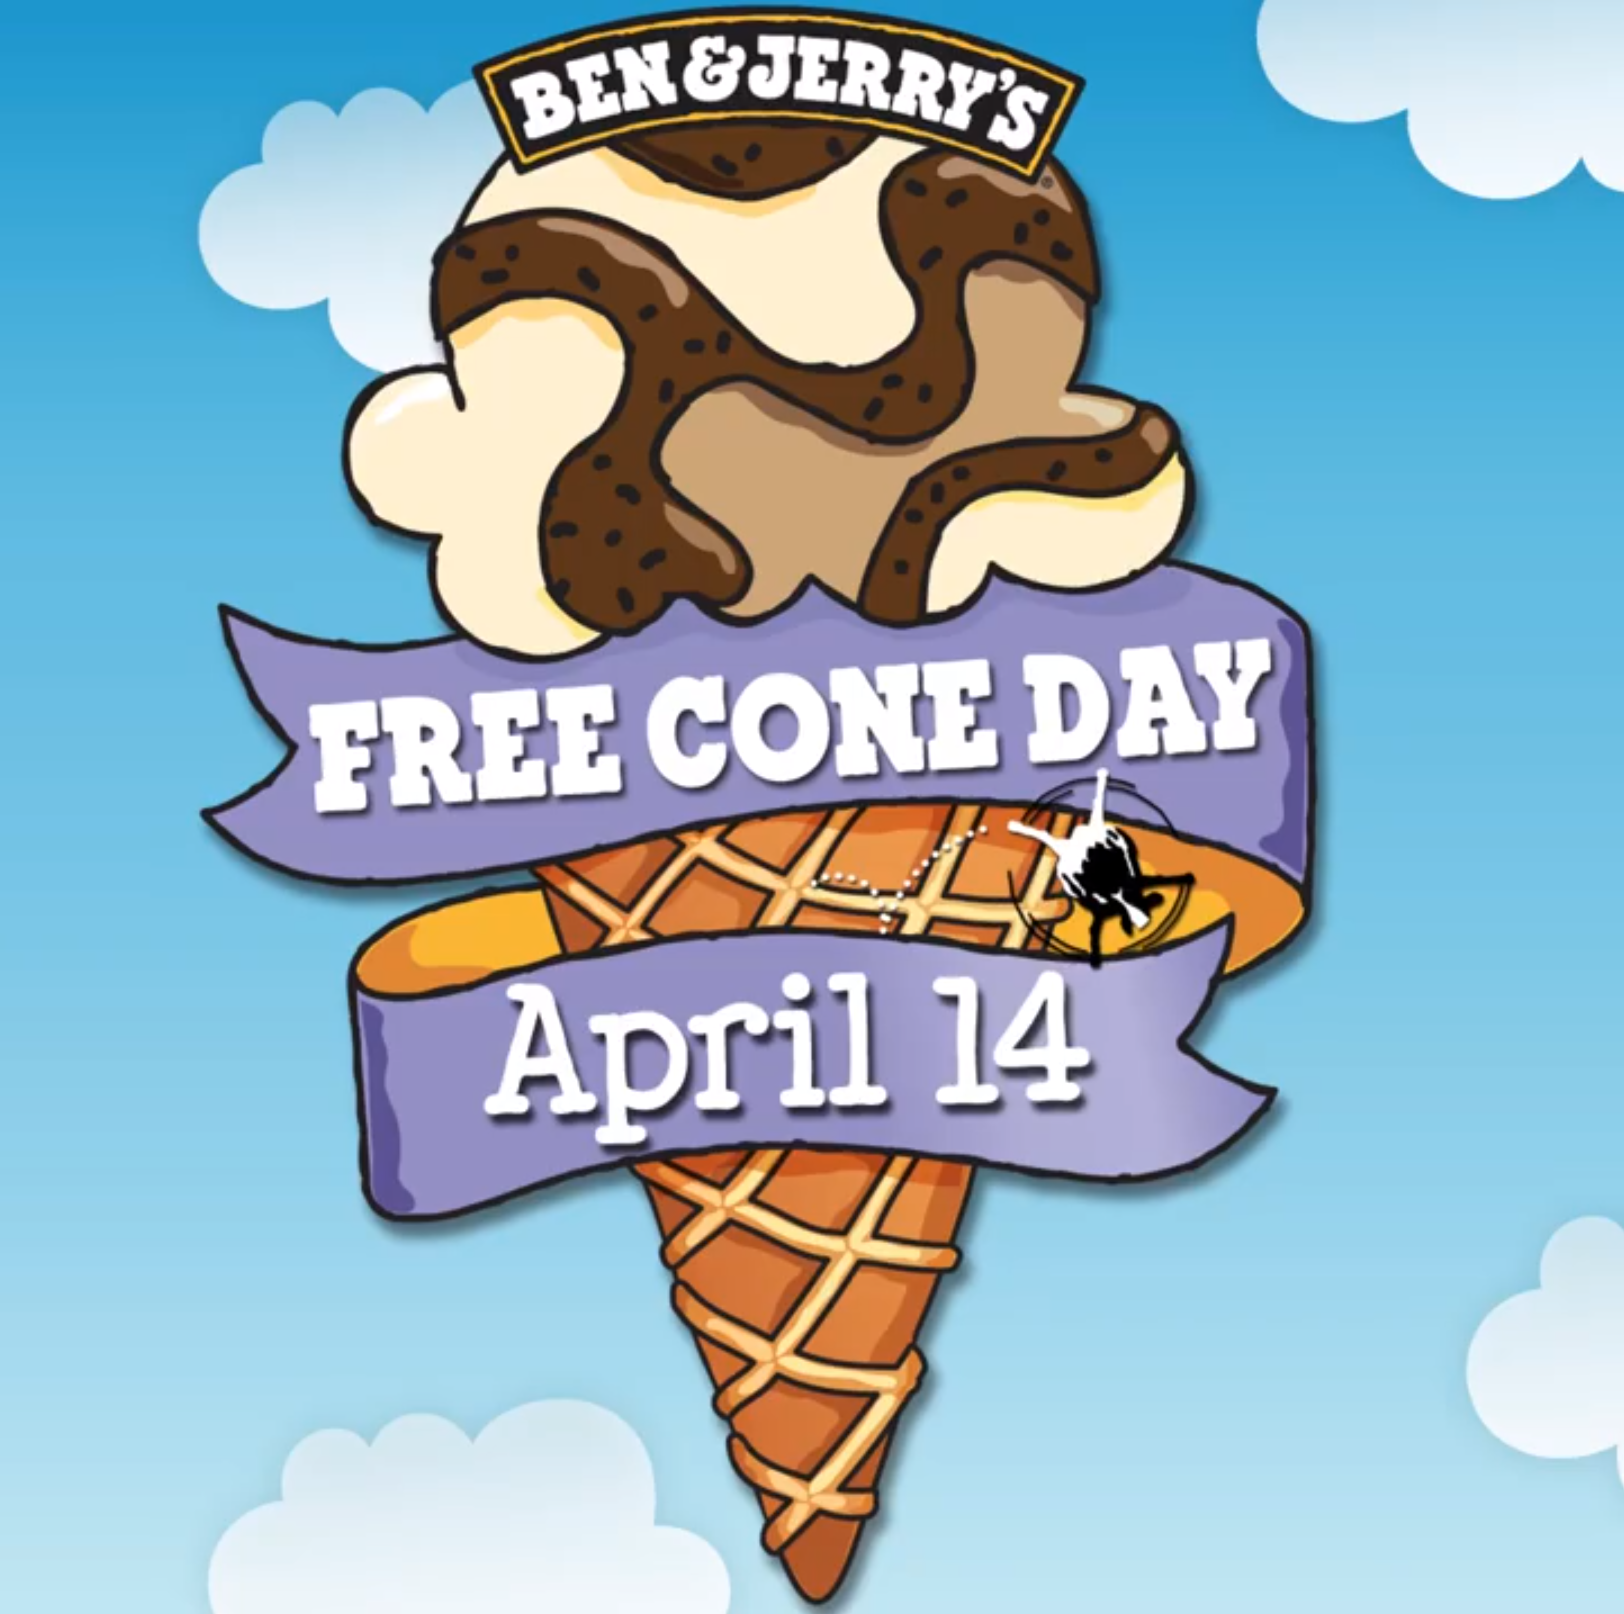 Tuesday Freebies - Free Cone Day at Ben & Jerry's